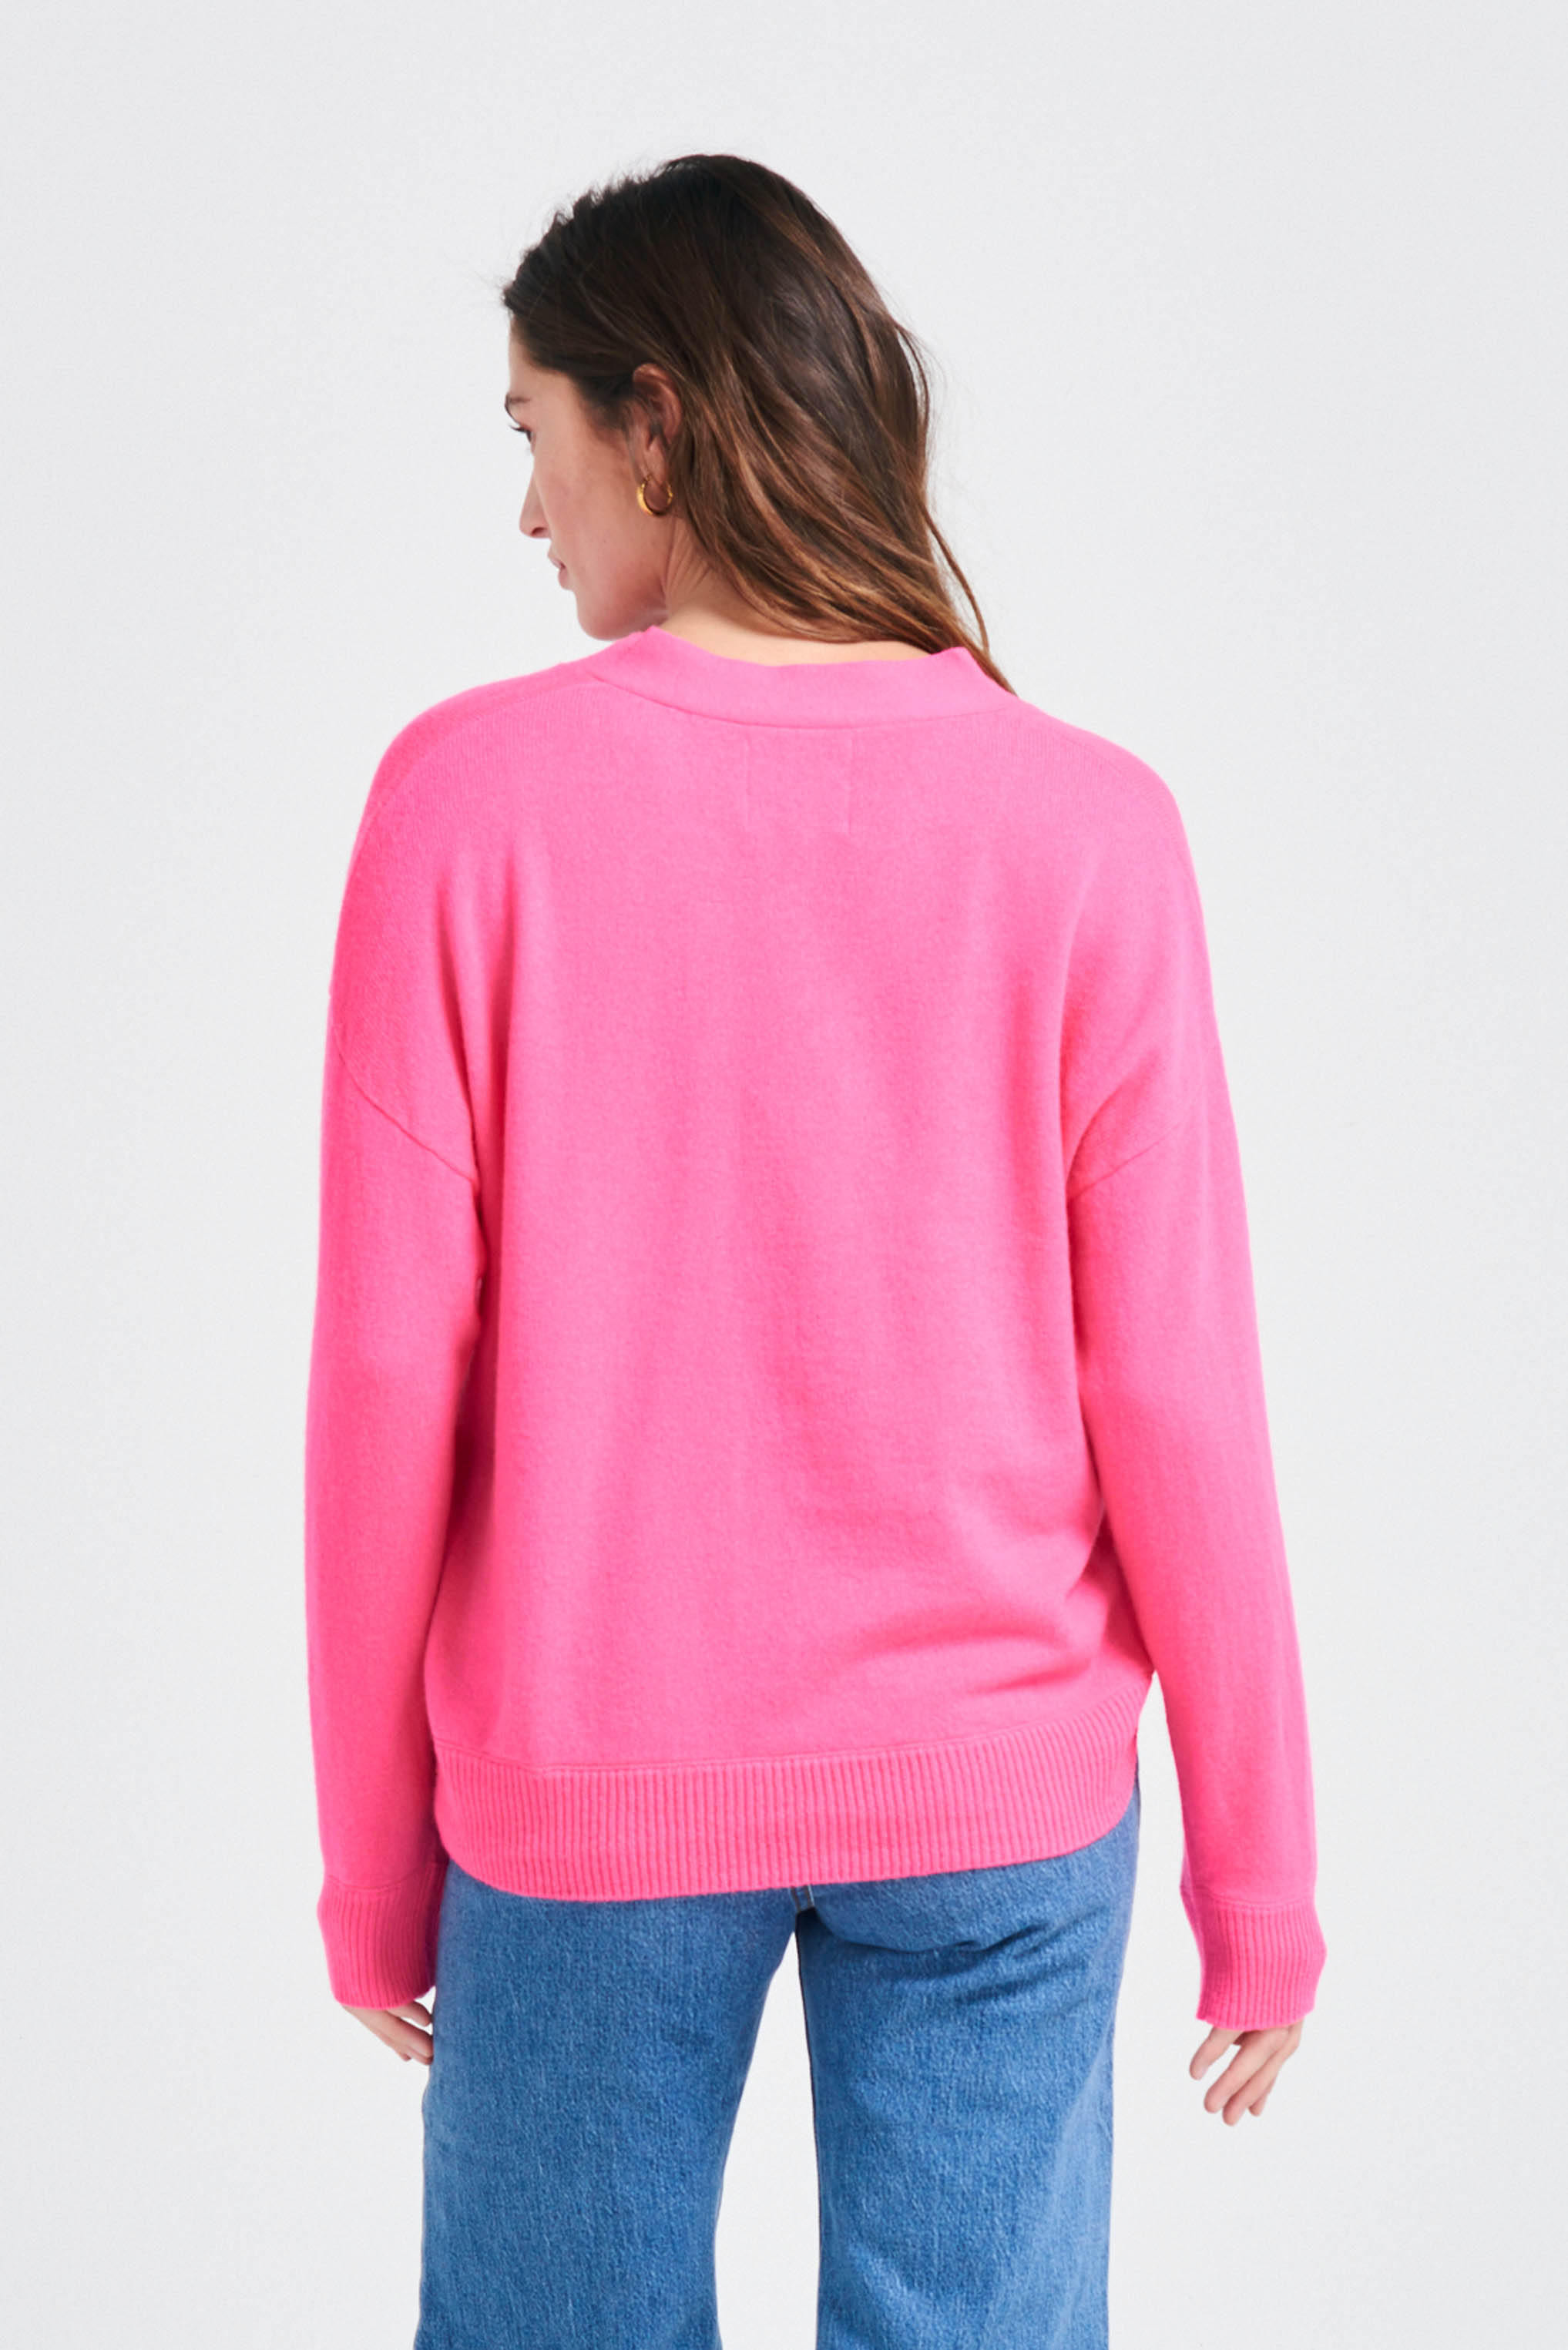 Brown haired female model wearing Jumper1234 Oversize cashmere vee neck cardigan in neon pink facing away from the camera